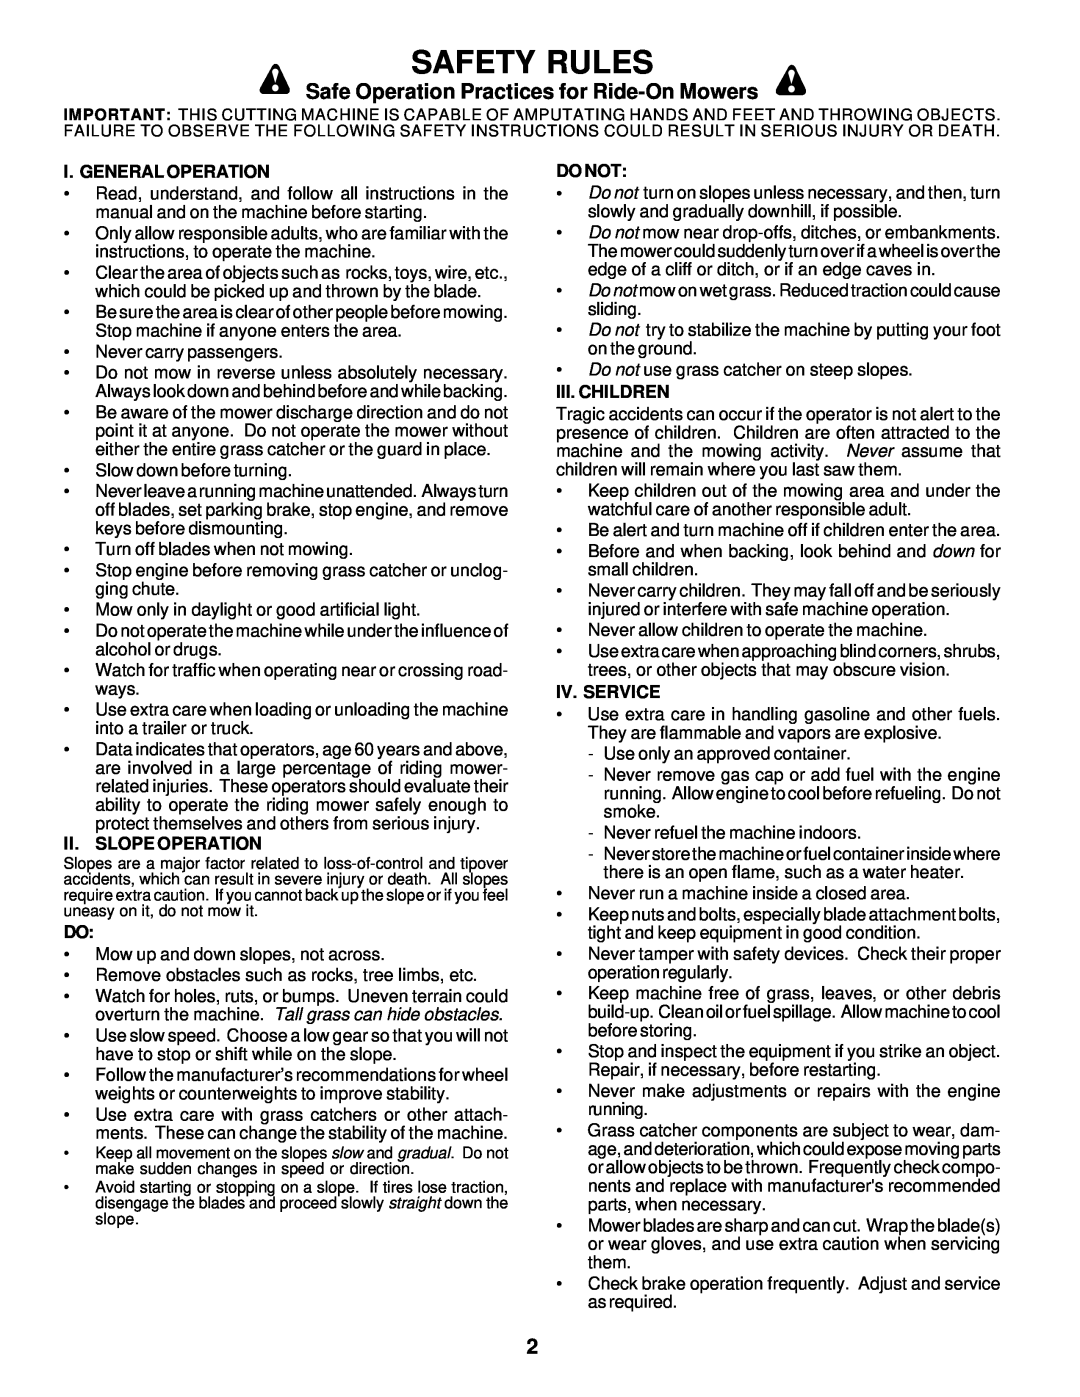 Weed Eater 171883 Safety Rules, Safe Operation Practices for Ride-On Mowers, I. General Operation, Ii. Slope Operation 